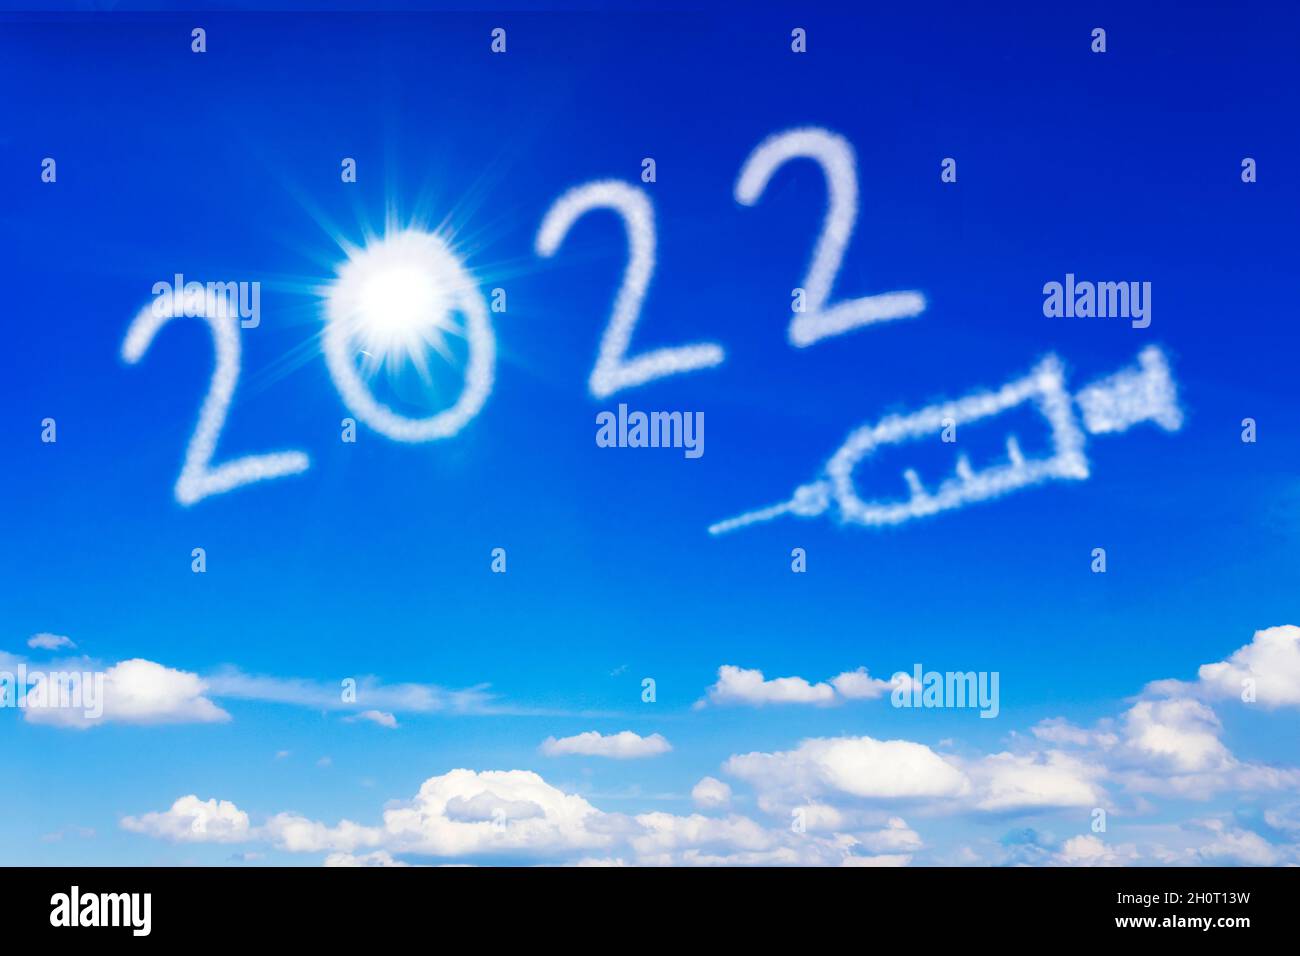 Happy New Year concept. Bright sun, number 2022 and a syringe icon on blue sky, symbolising an end to the covid pandemic. Stock Photo